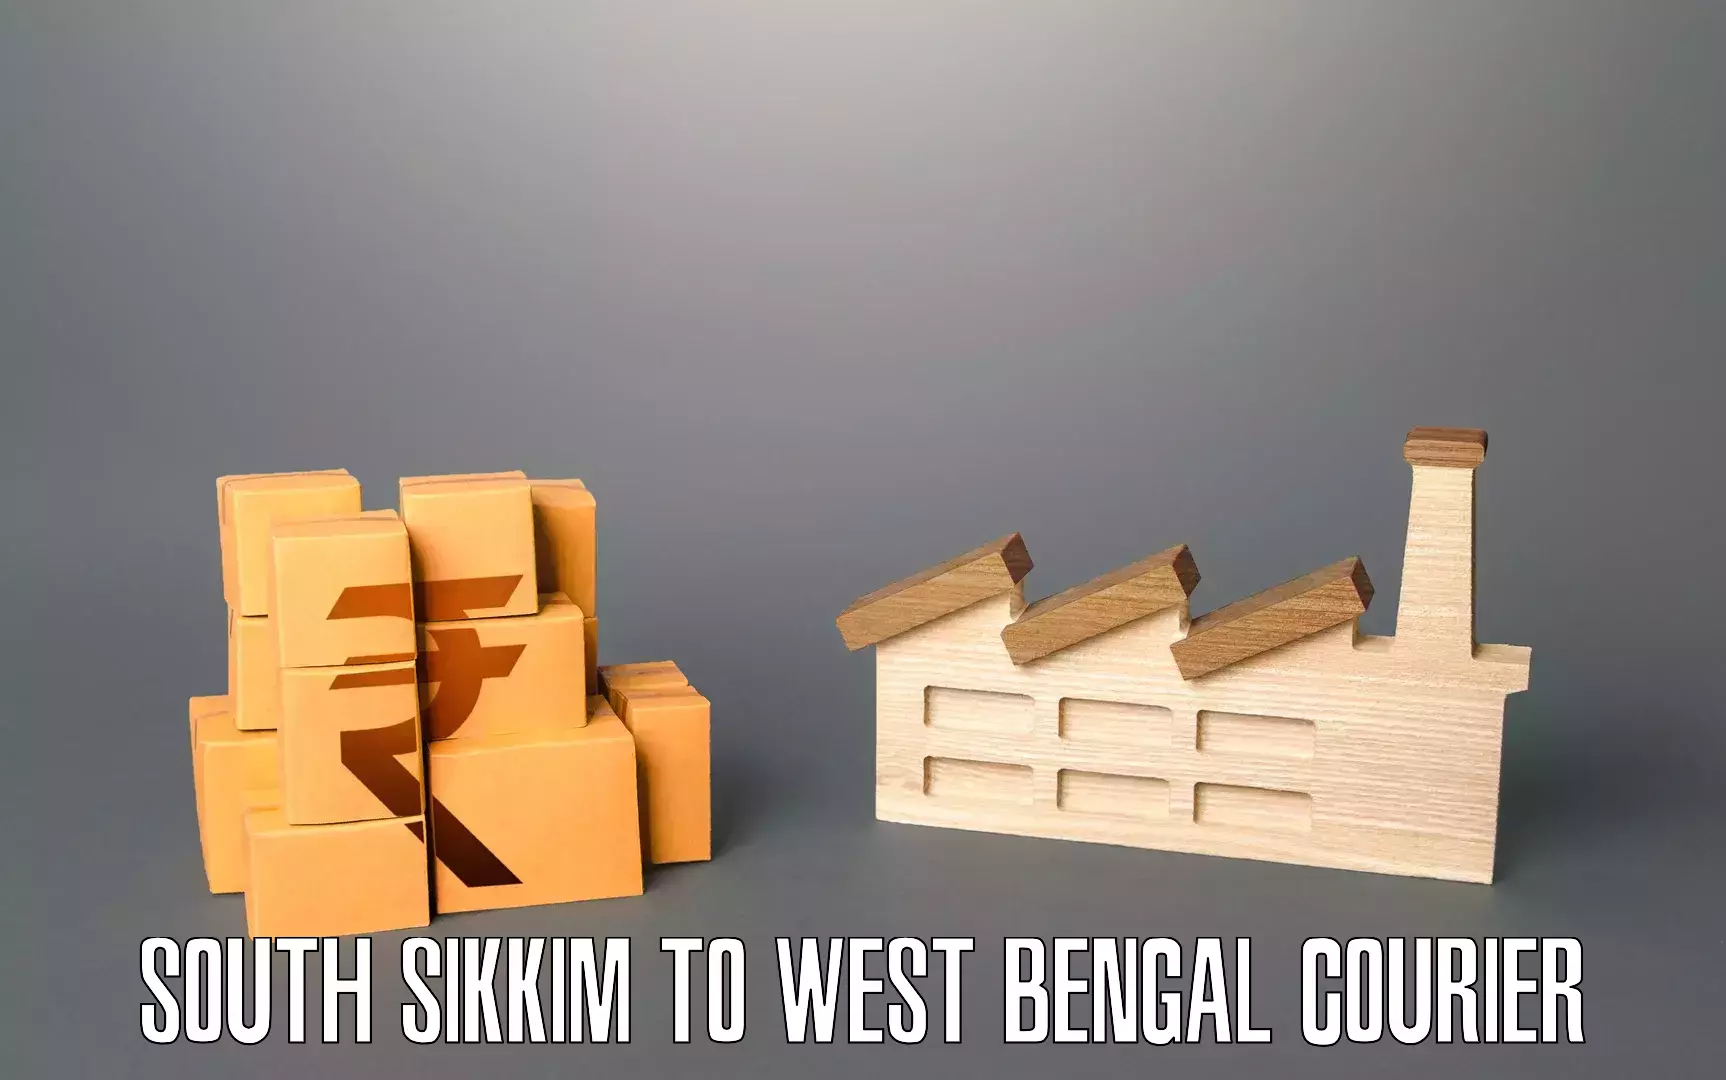 Hassle-free relocation South Sikkim to Uttar Dinajpur